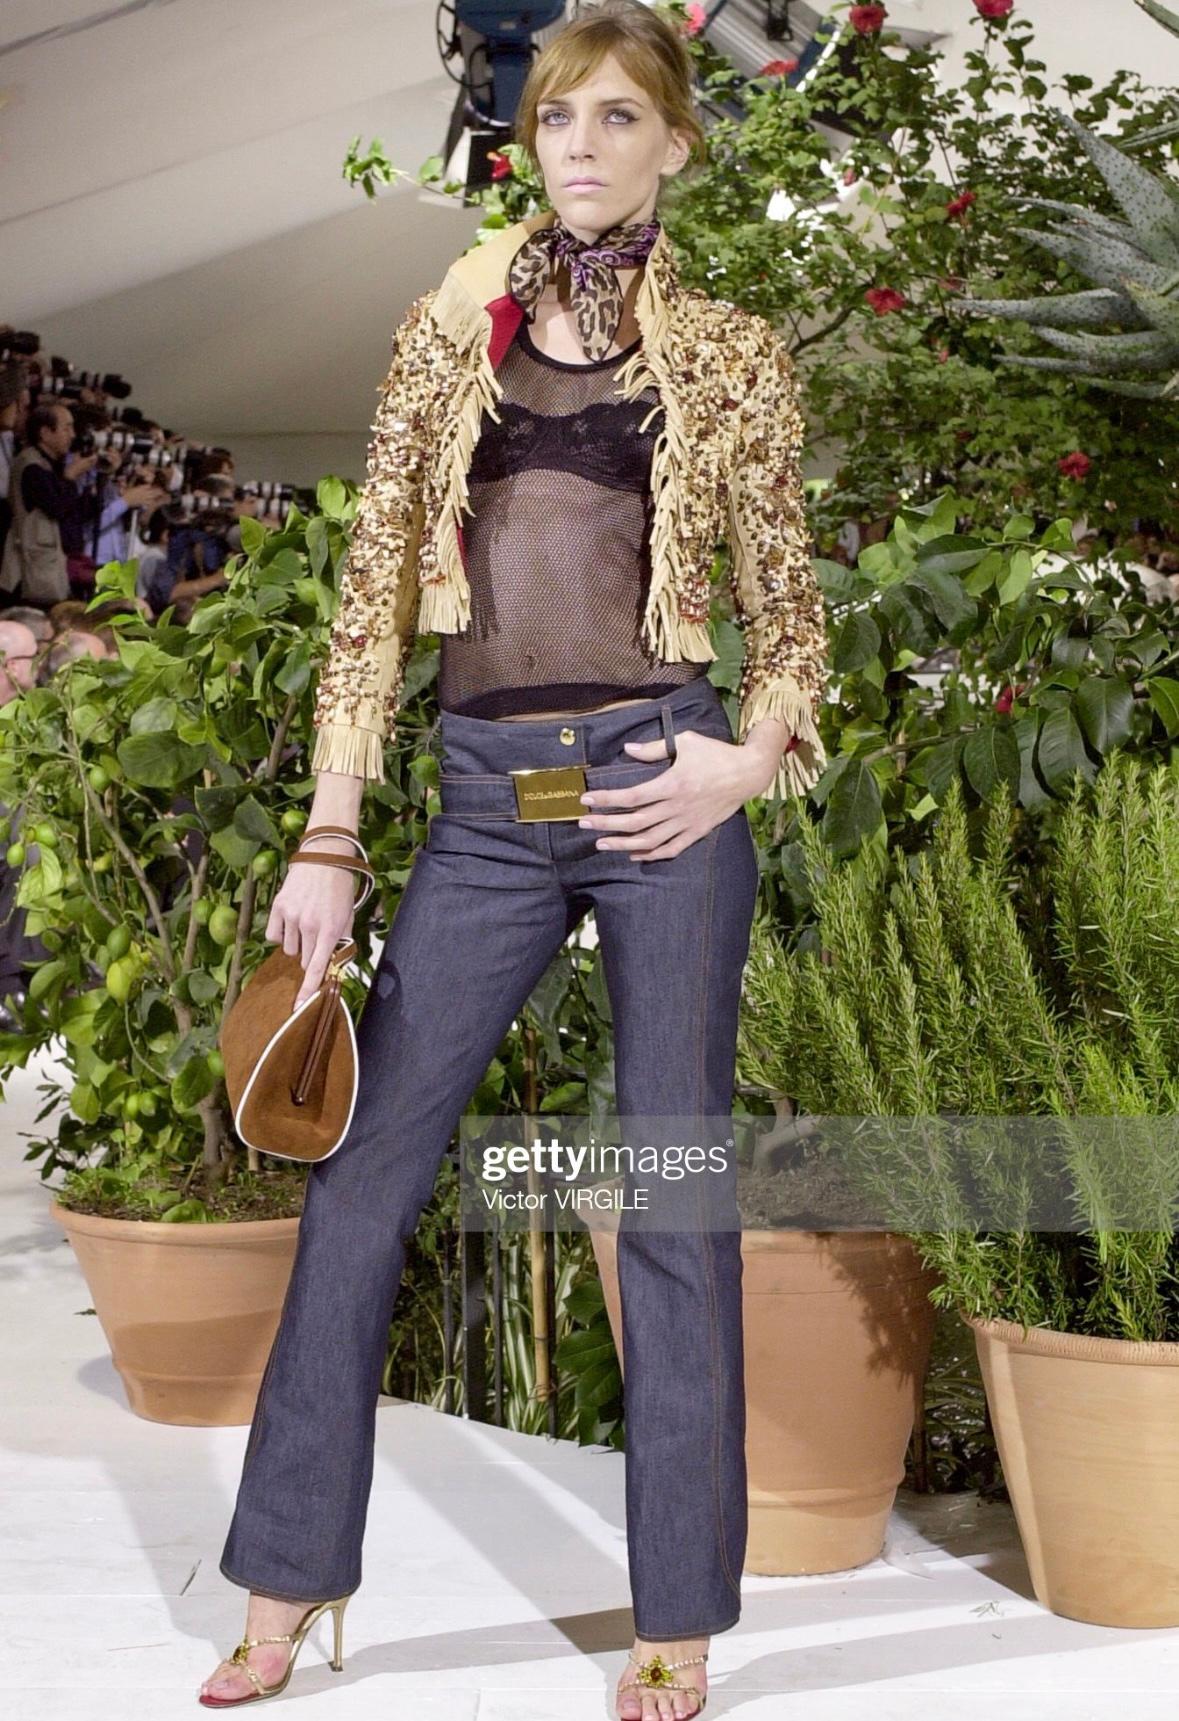 Presenting a fabulous pair of deep navy Dolce & Gabbana jeans. From the Spring/Summer 2001 collection, these jeans debuted on the season's runway as part of look 18, modeled by Hannelore Knuts. These pants stand out with a large gold-tone 'Dolce &